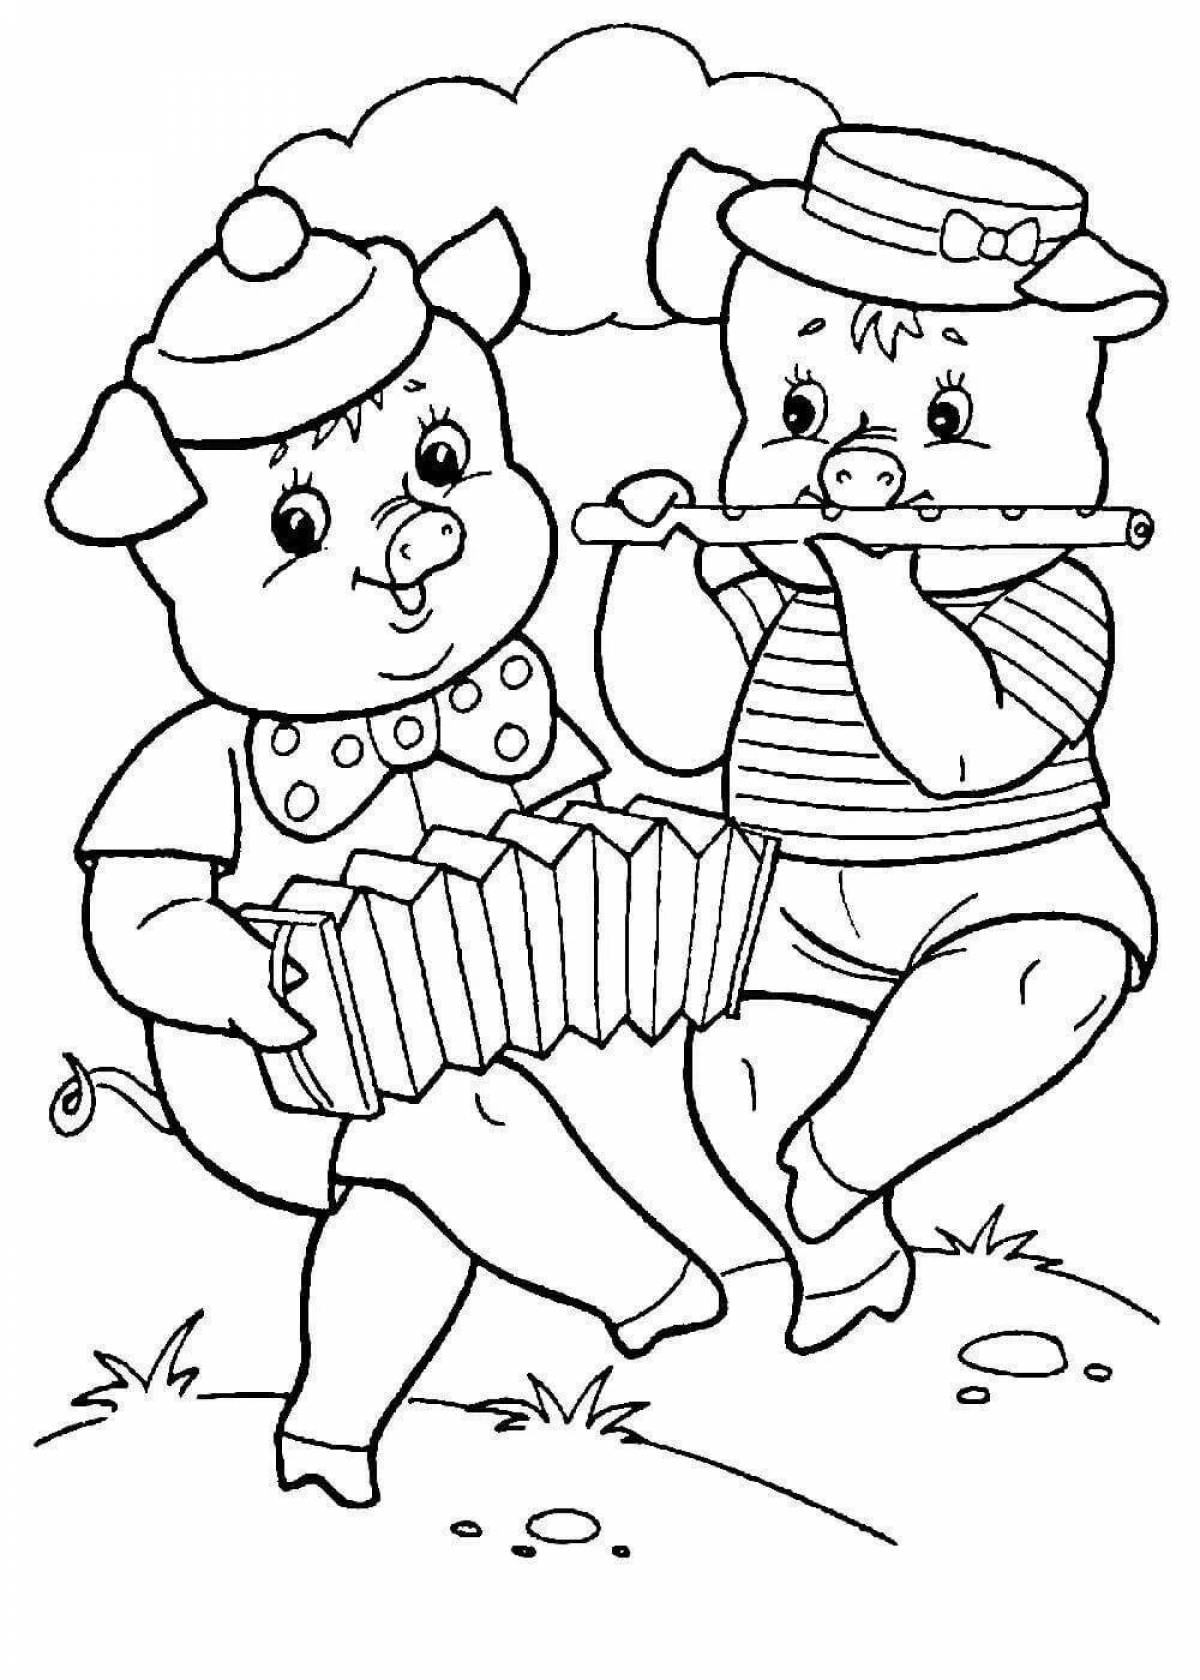 Coloring 3 pigs for babies